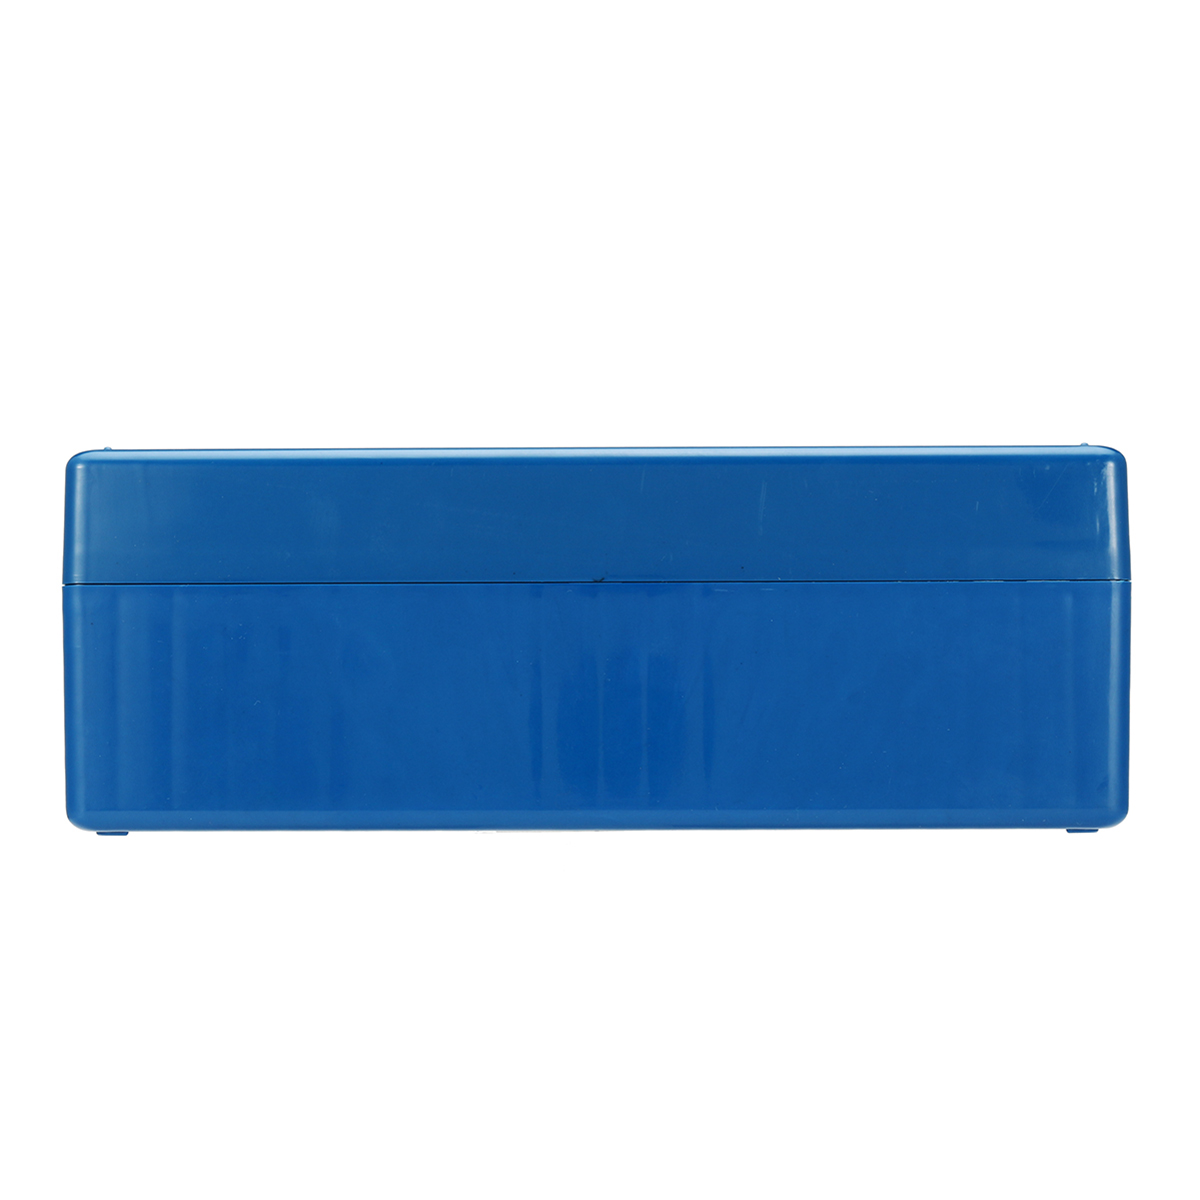 25x9x7cm-Blue-Storage-Tool-Box-Case-Holds-20-Individual-Certified-PCGS-NGC-ICG-Coin-Holders-1425243-5